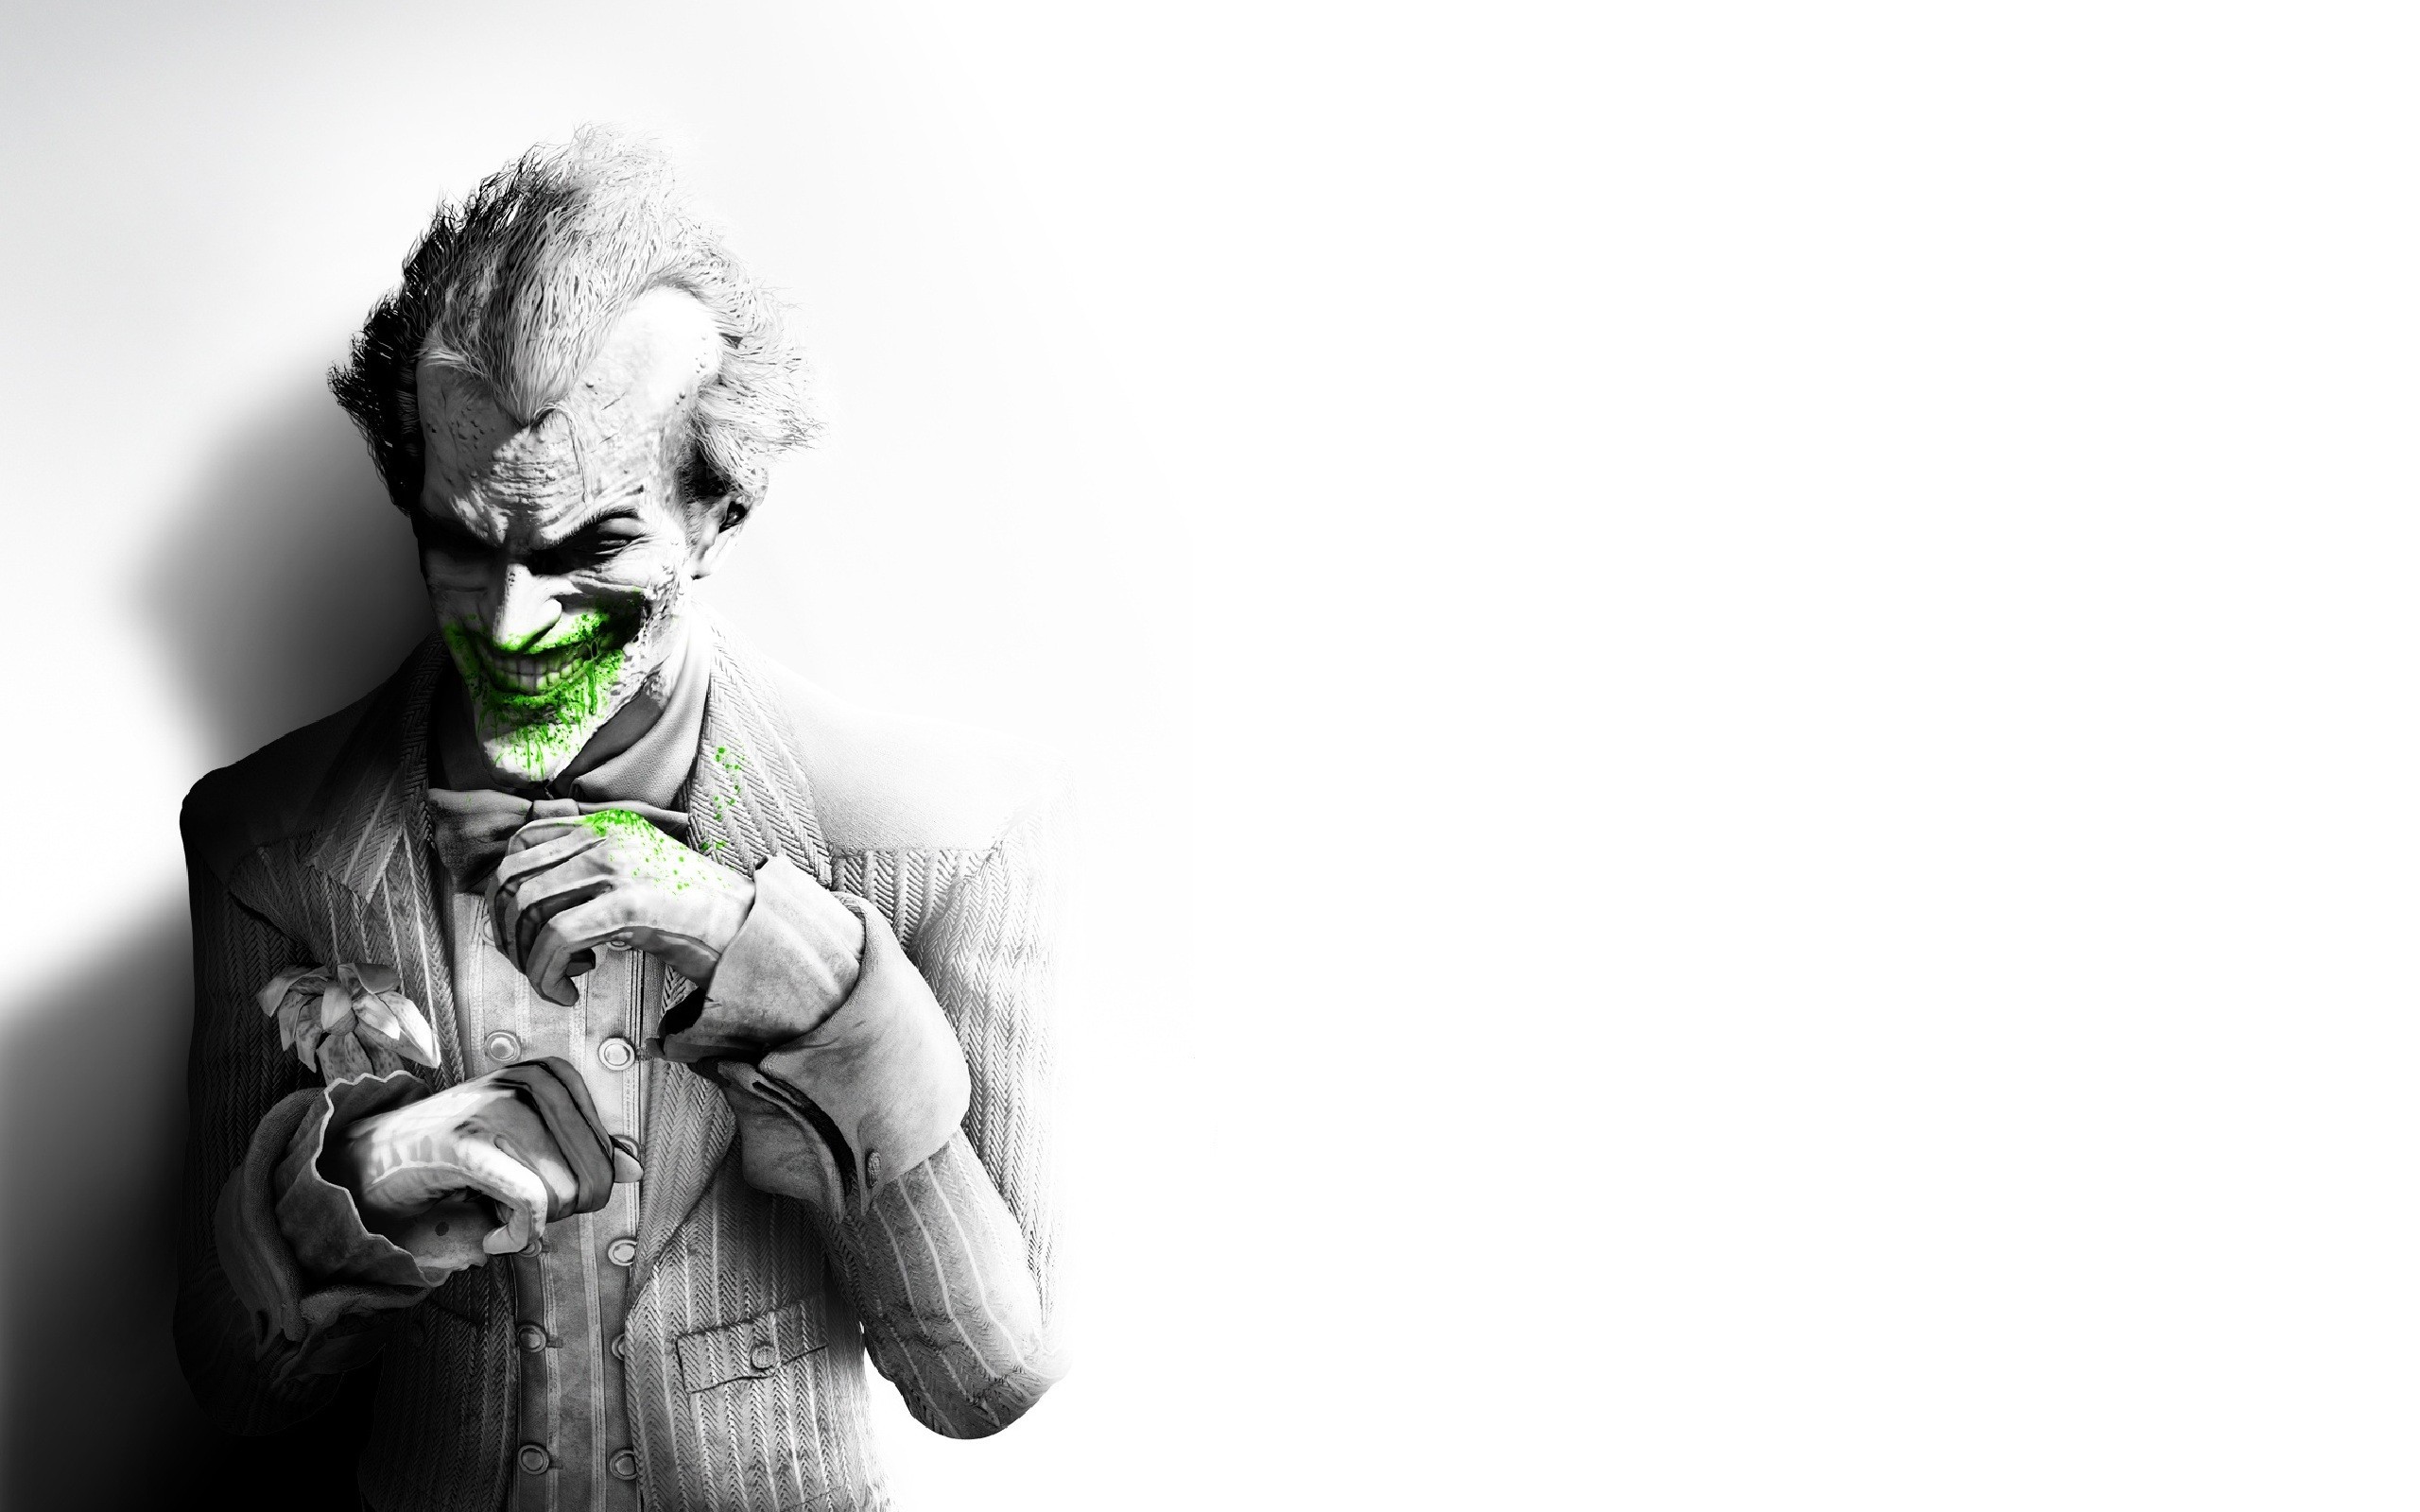 2560x1600 Looking for Harley Quinn wallpaper similar in style to this Joker one.